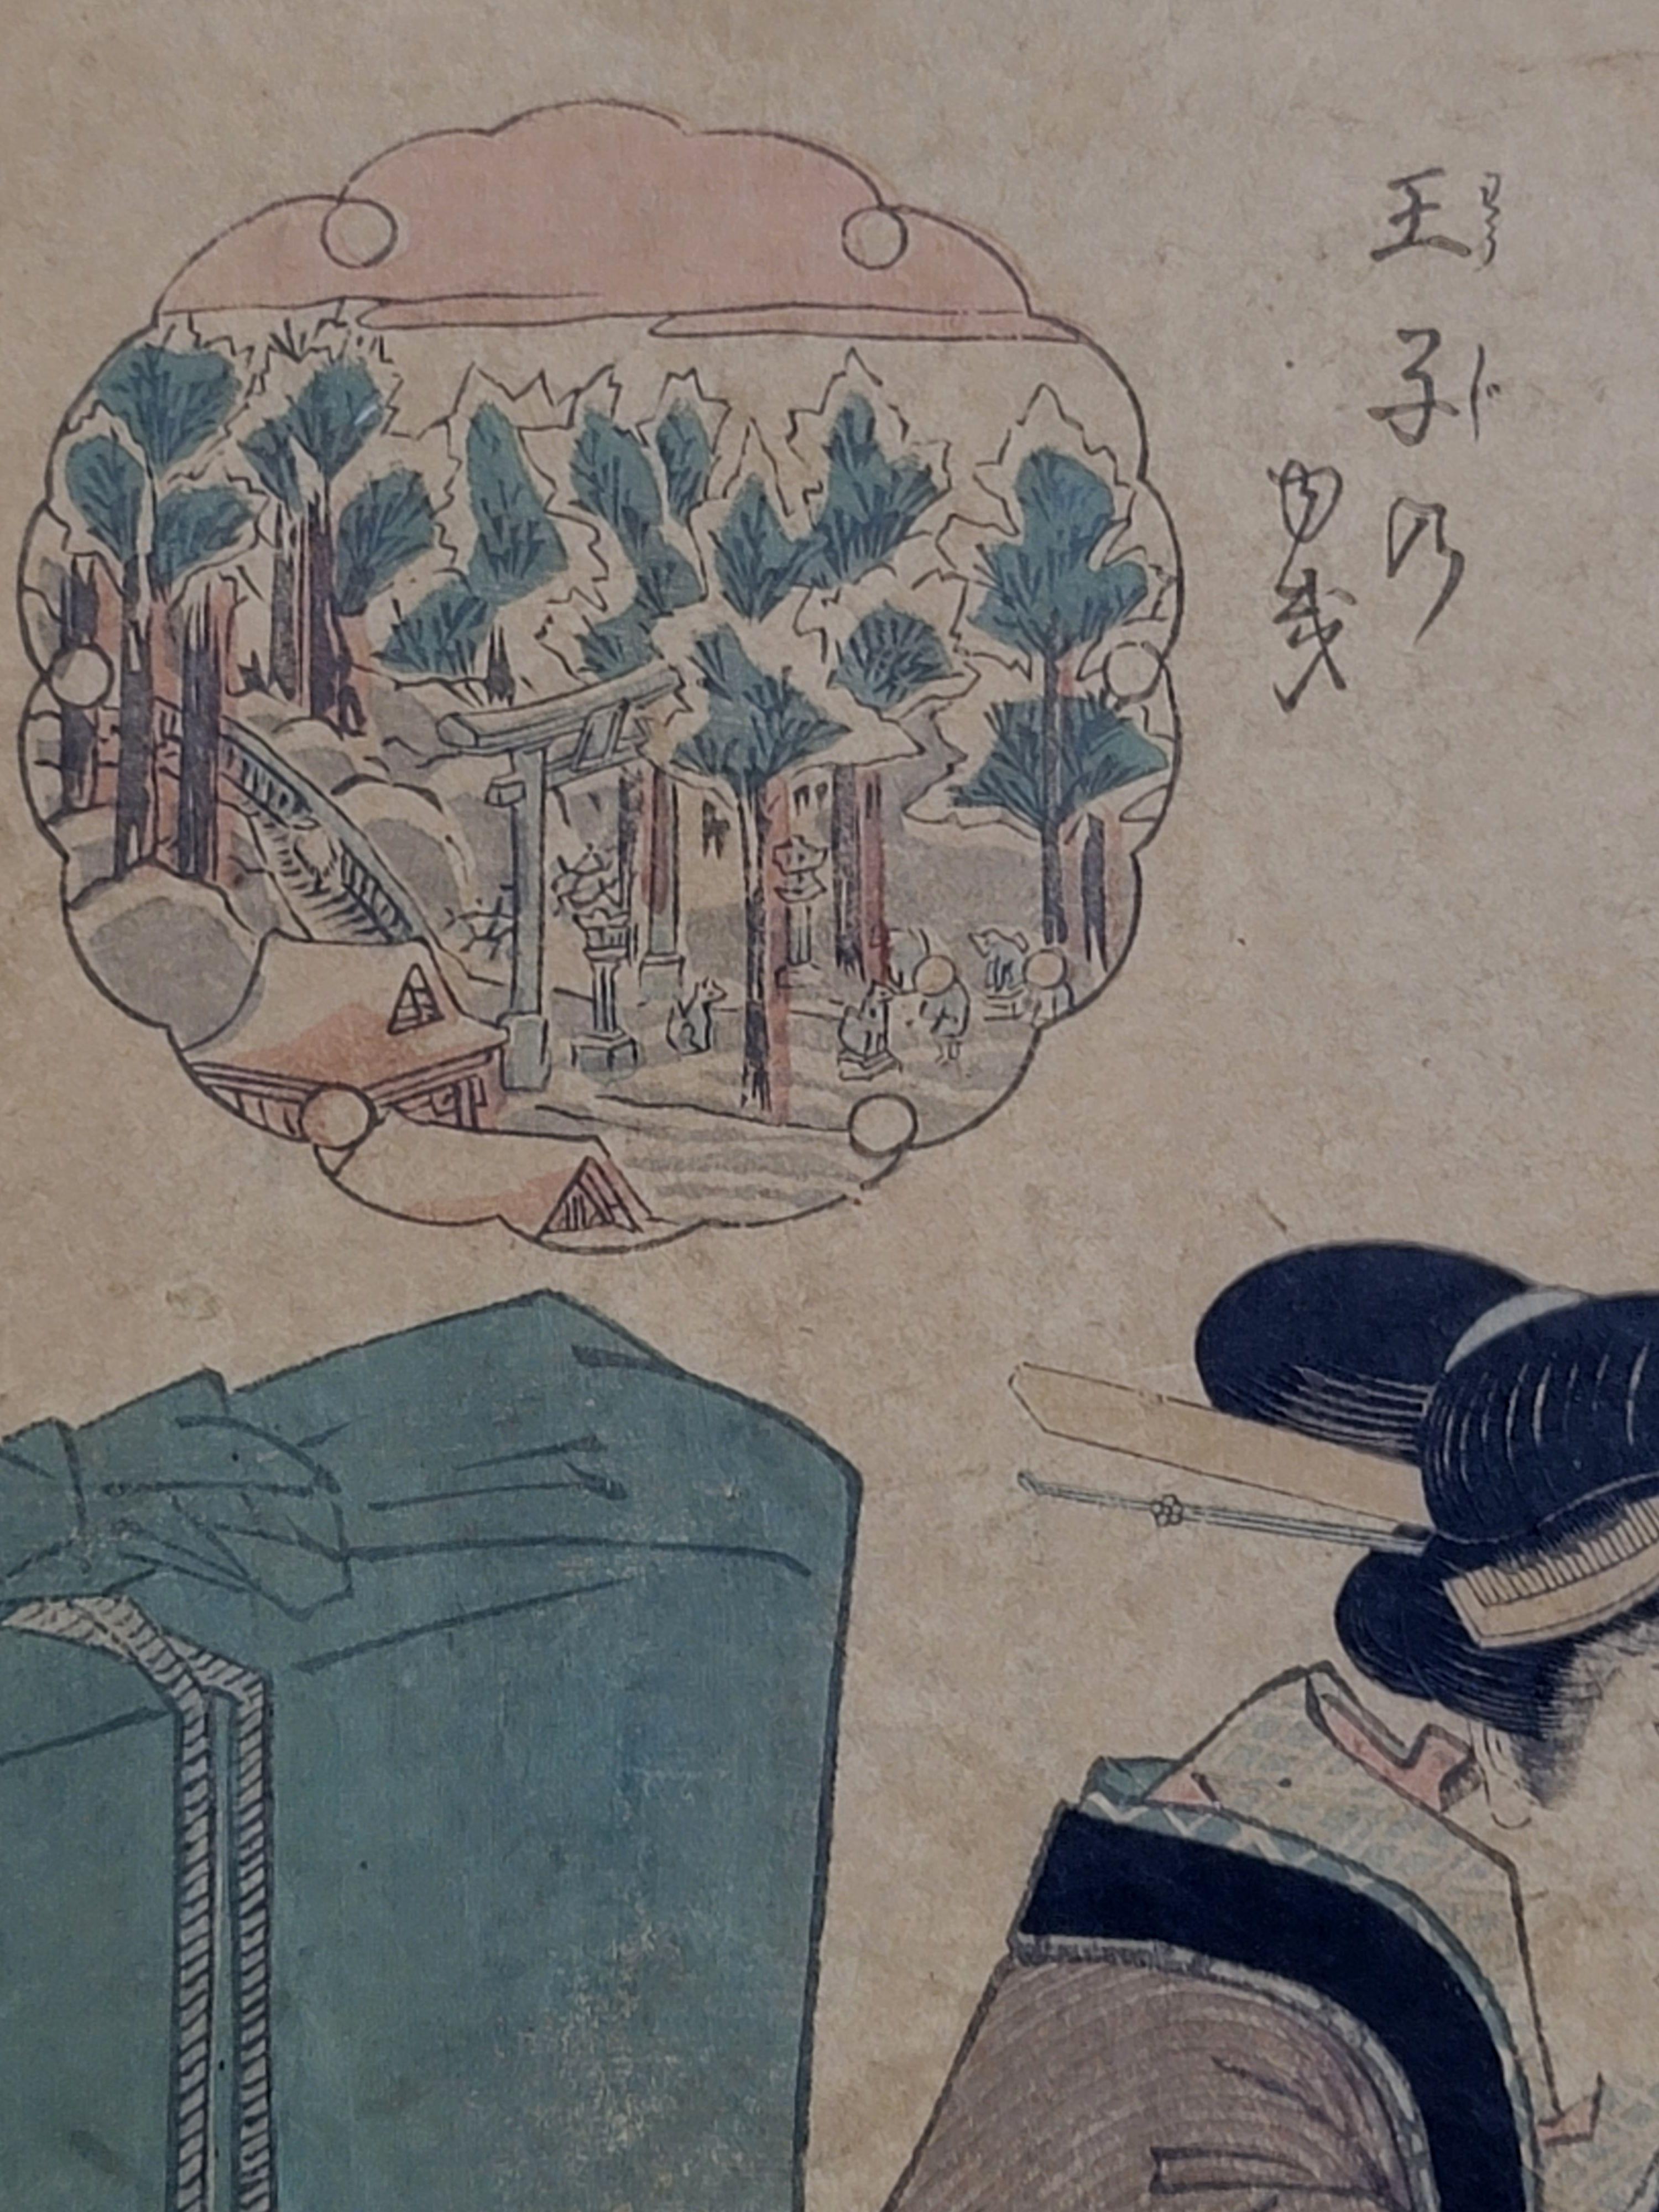 19th Century Japanese Woodblock Print by Keisai Eisen 渓斎 英泉 For Sale